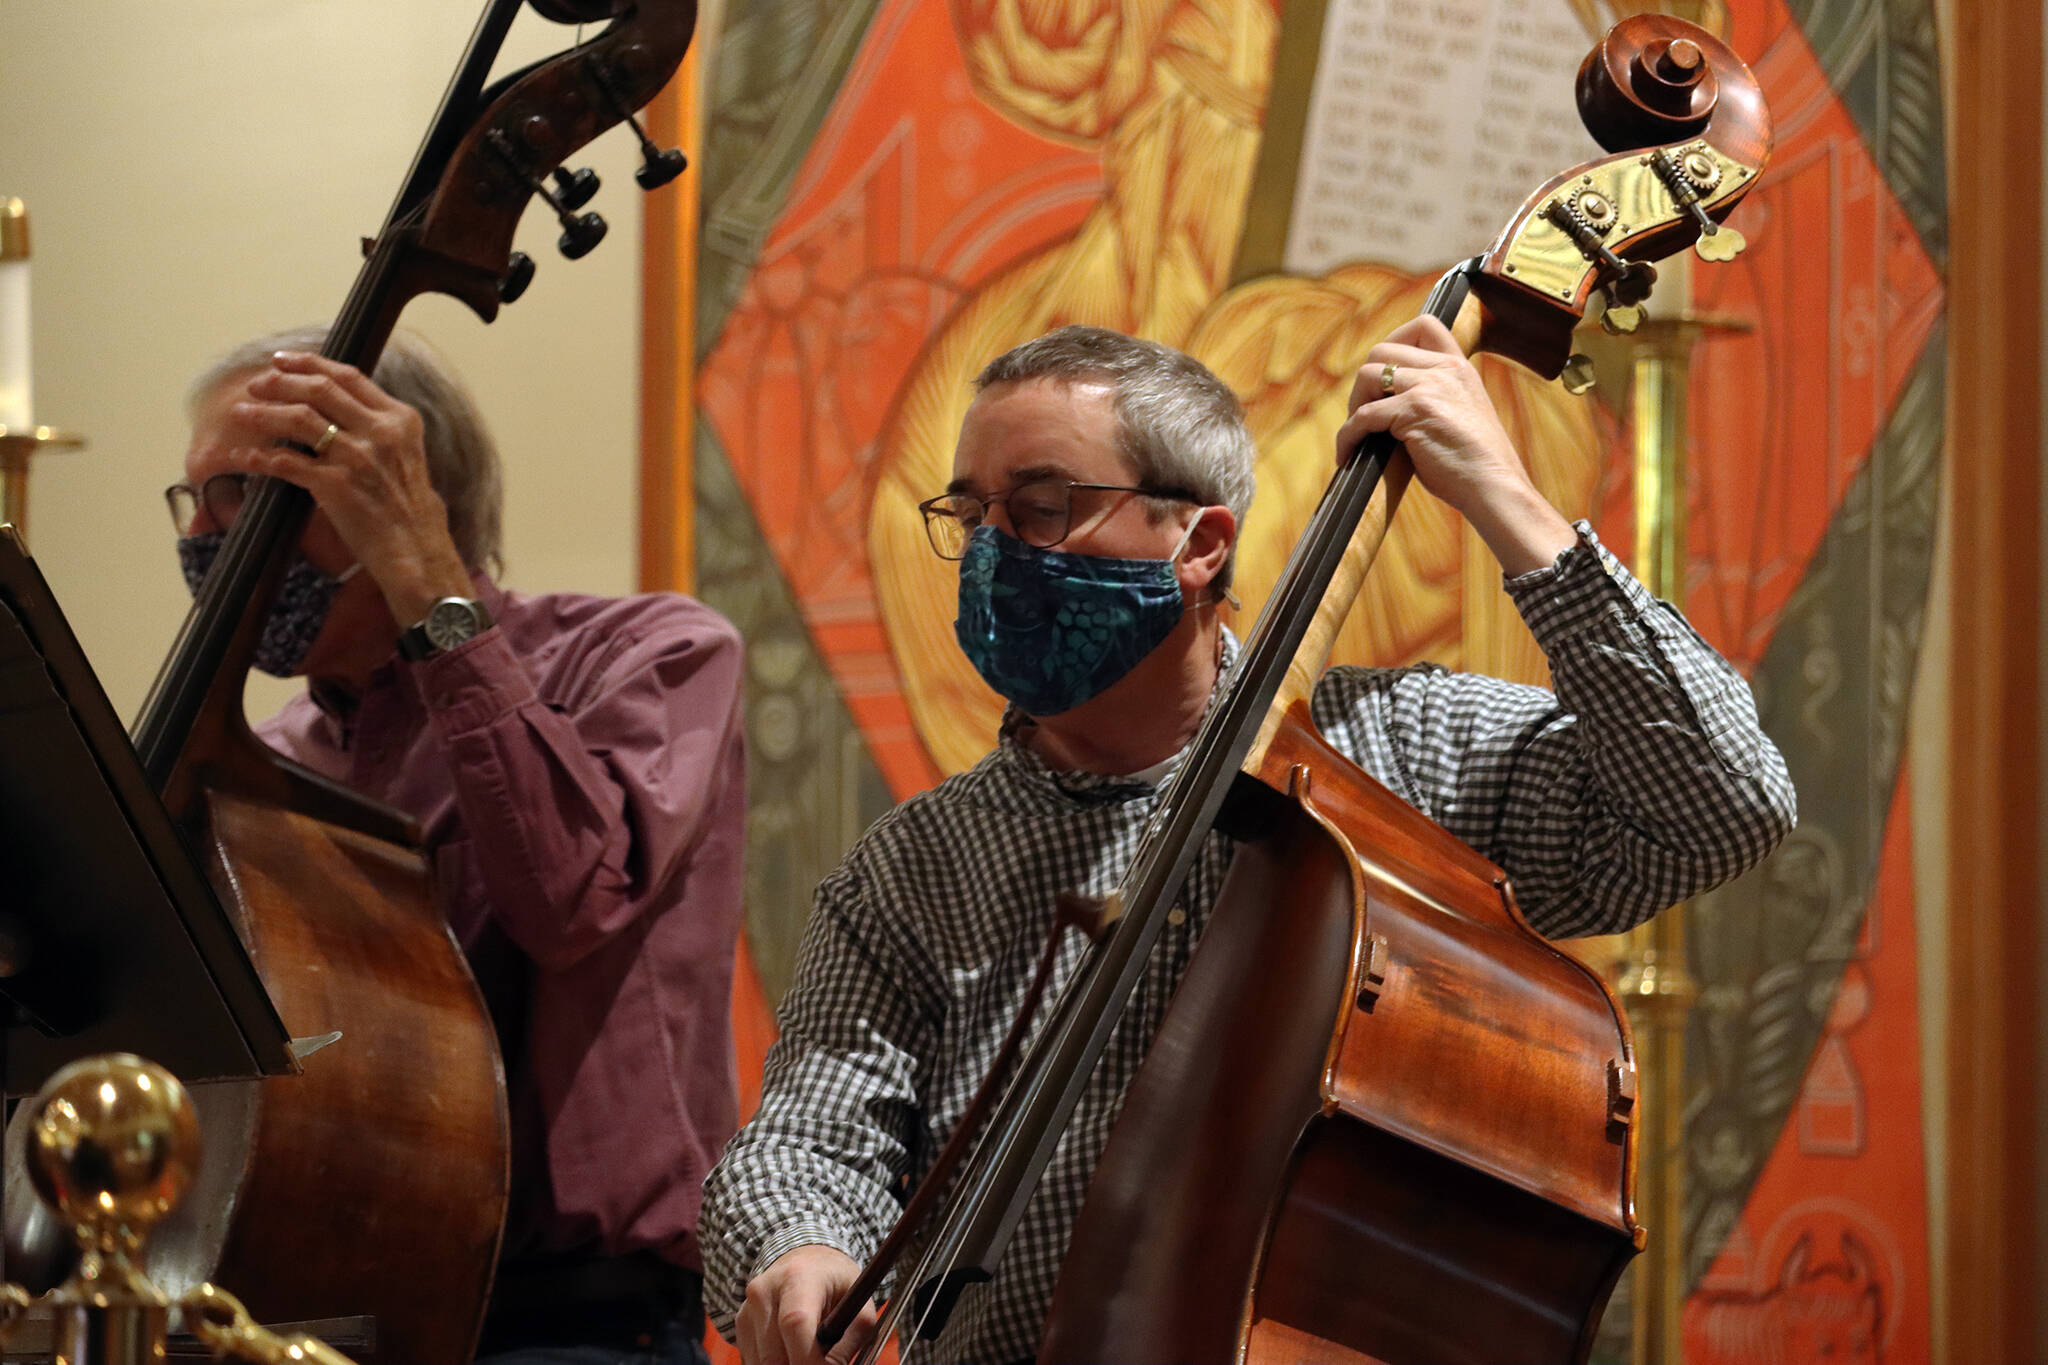 Playing bass in a mask was no “treble” for Wilson Valentine (right) and John Staub during rehearsals ahead of Juneau Symphony’s return to in-person performances. (Ben Hohenstatt / Juneau Empire)